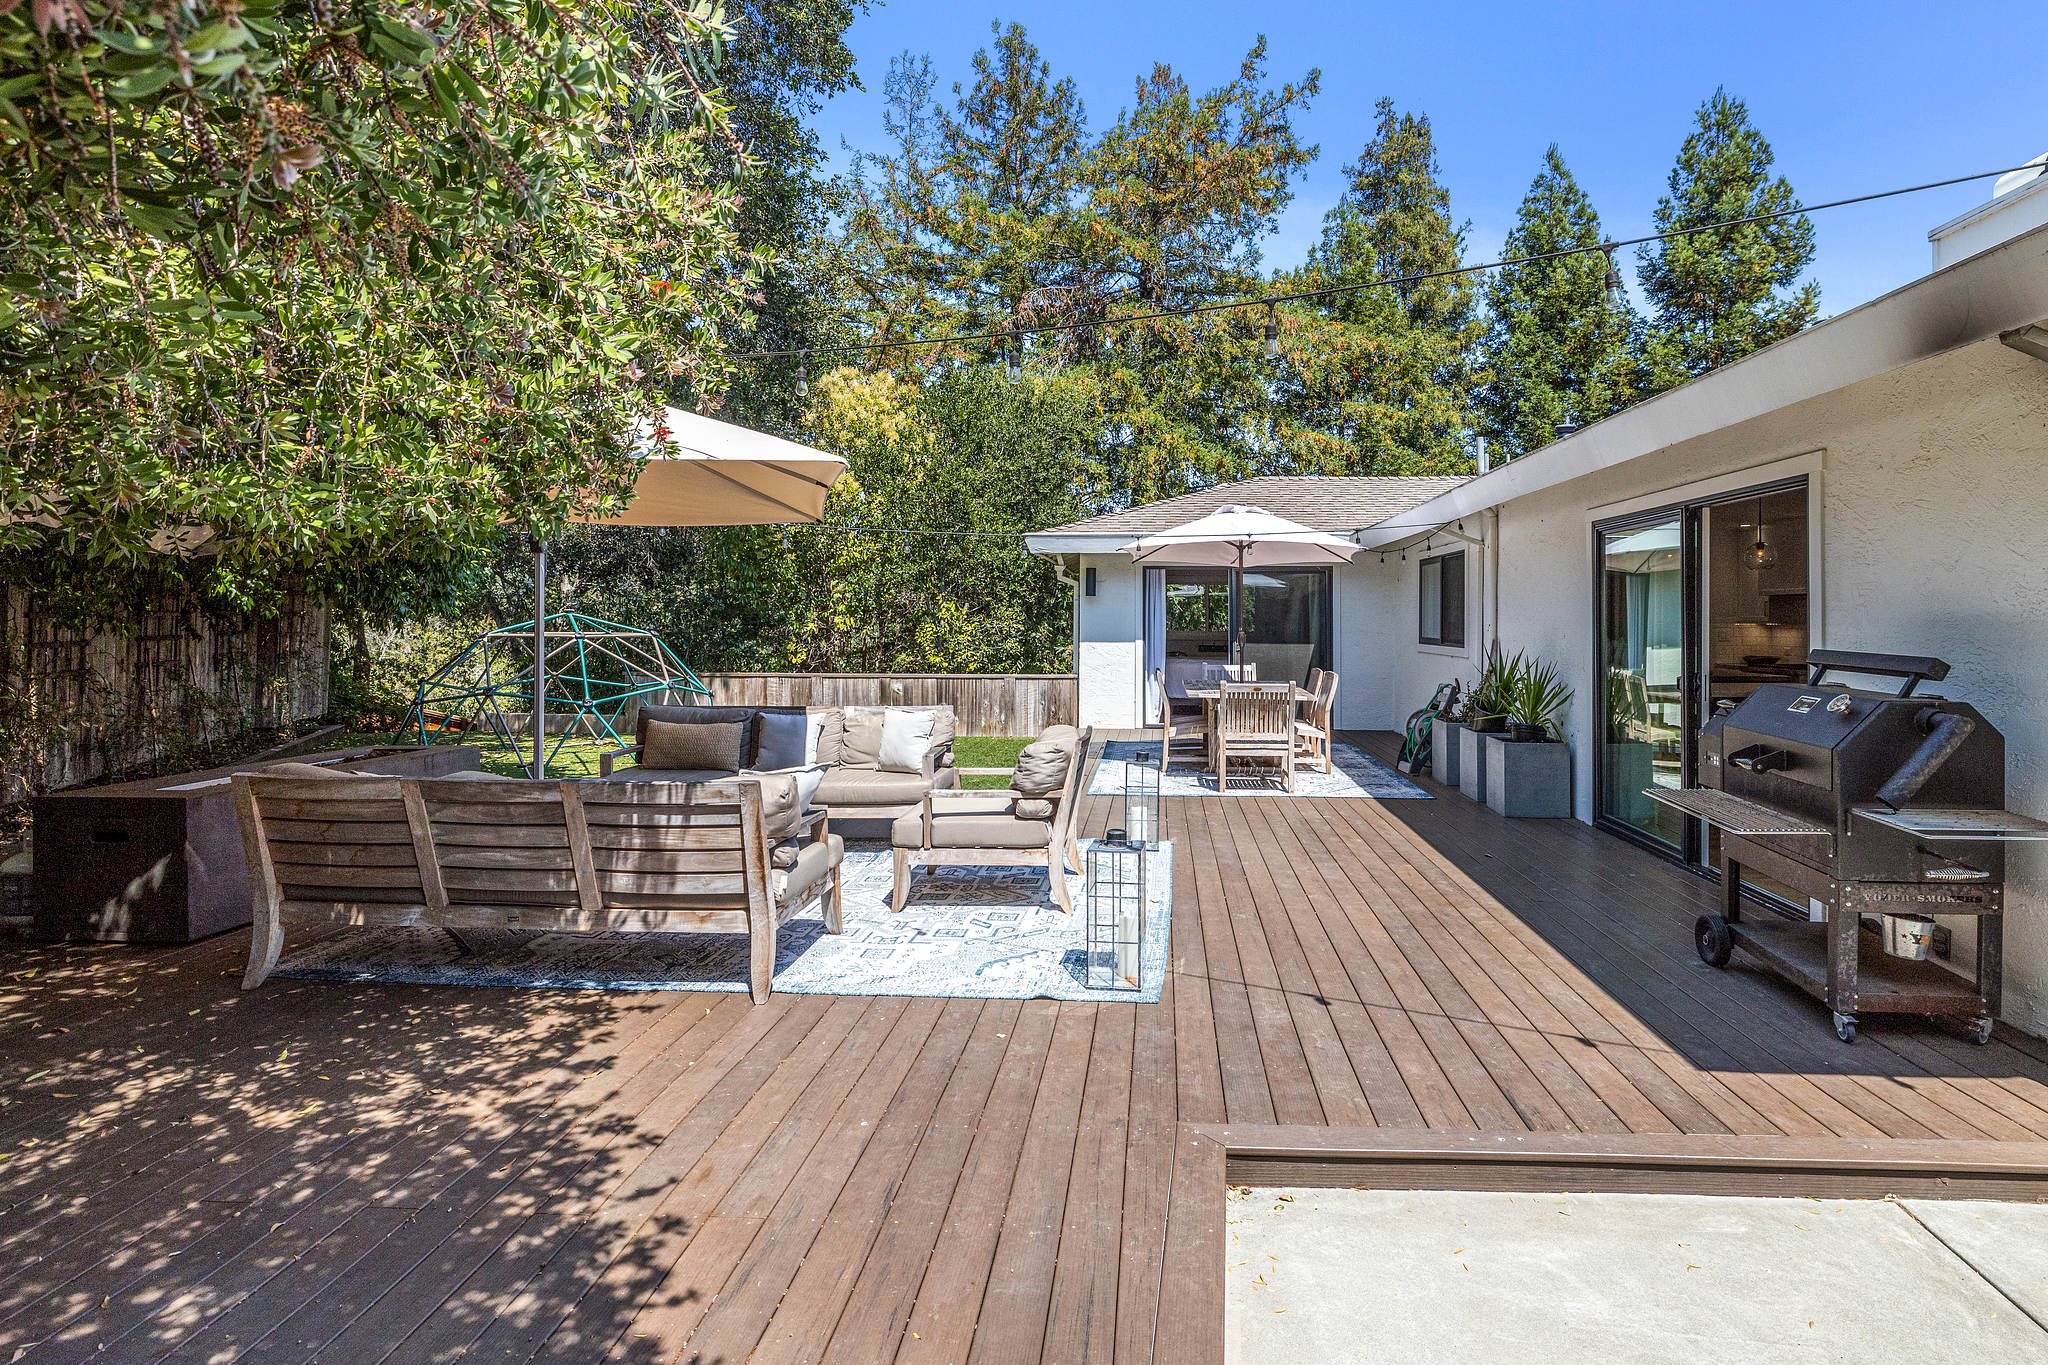 50 Quissisana Drive, Kentfield Realtor Whitney Blickman with Own Marin Real Estate-53.jpg